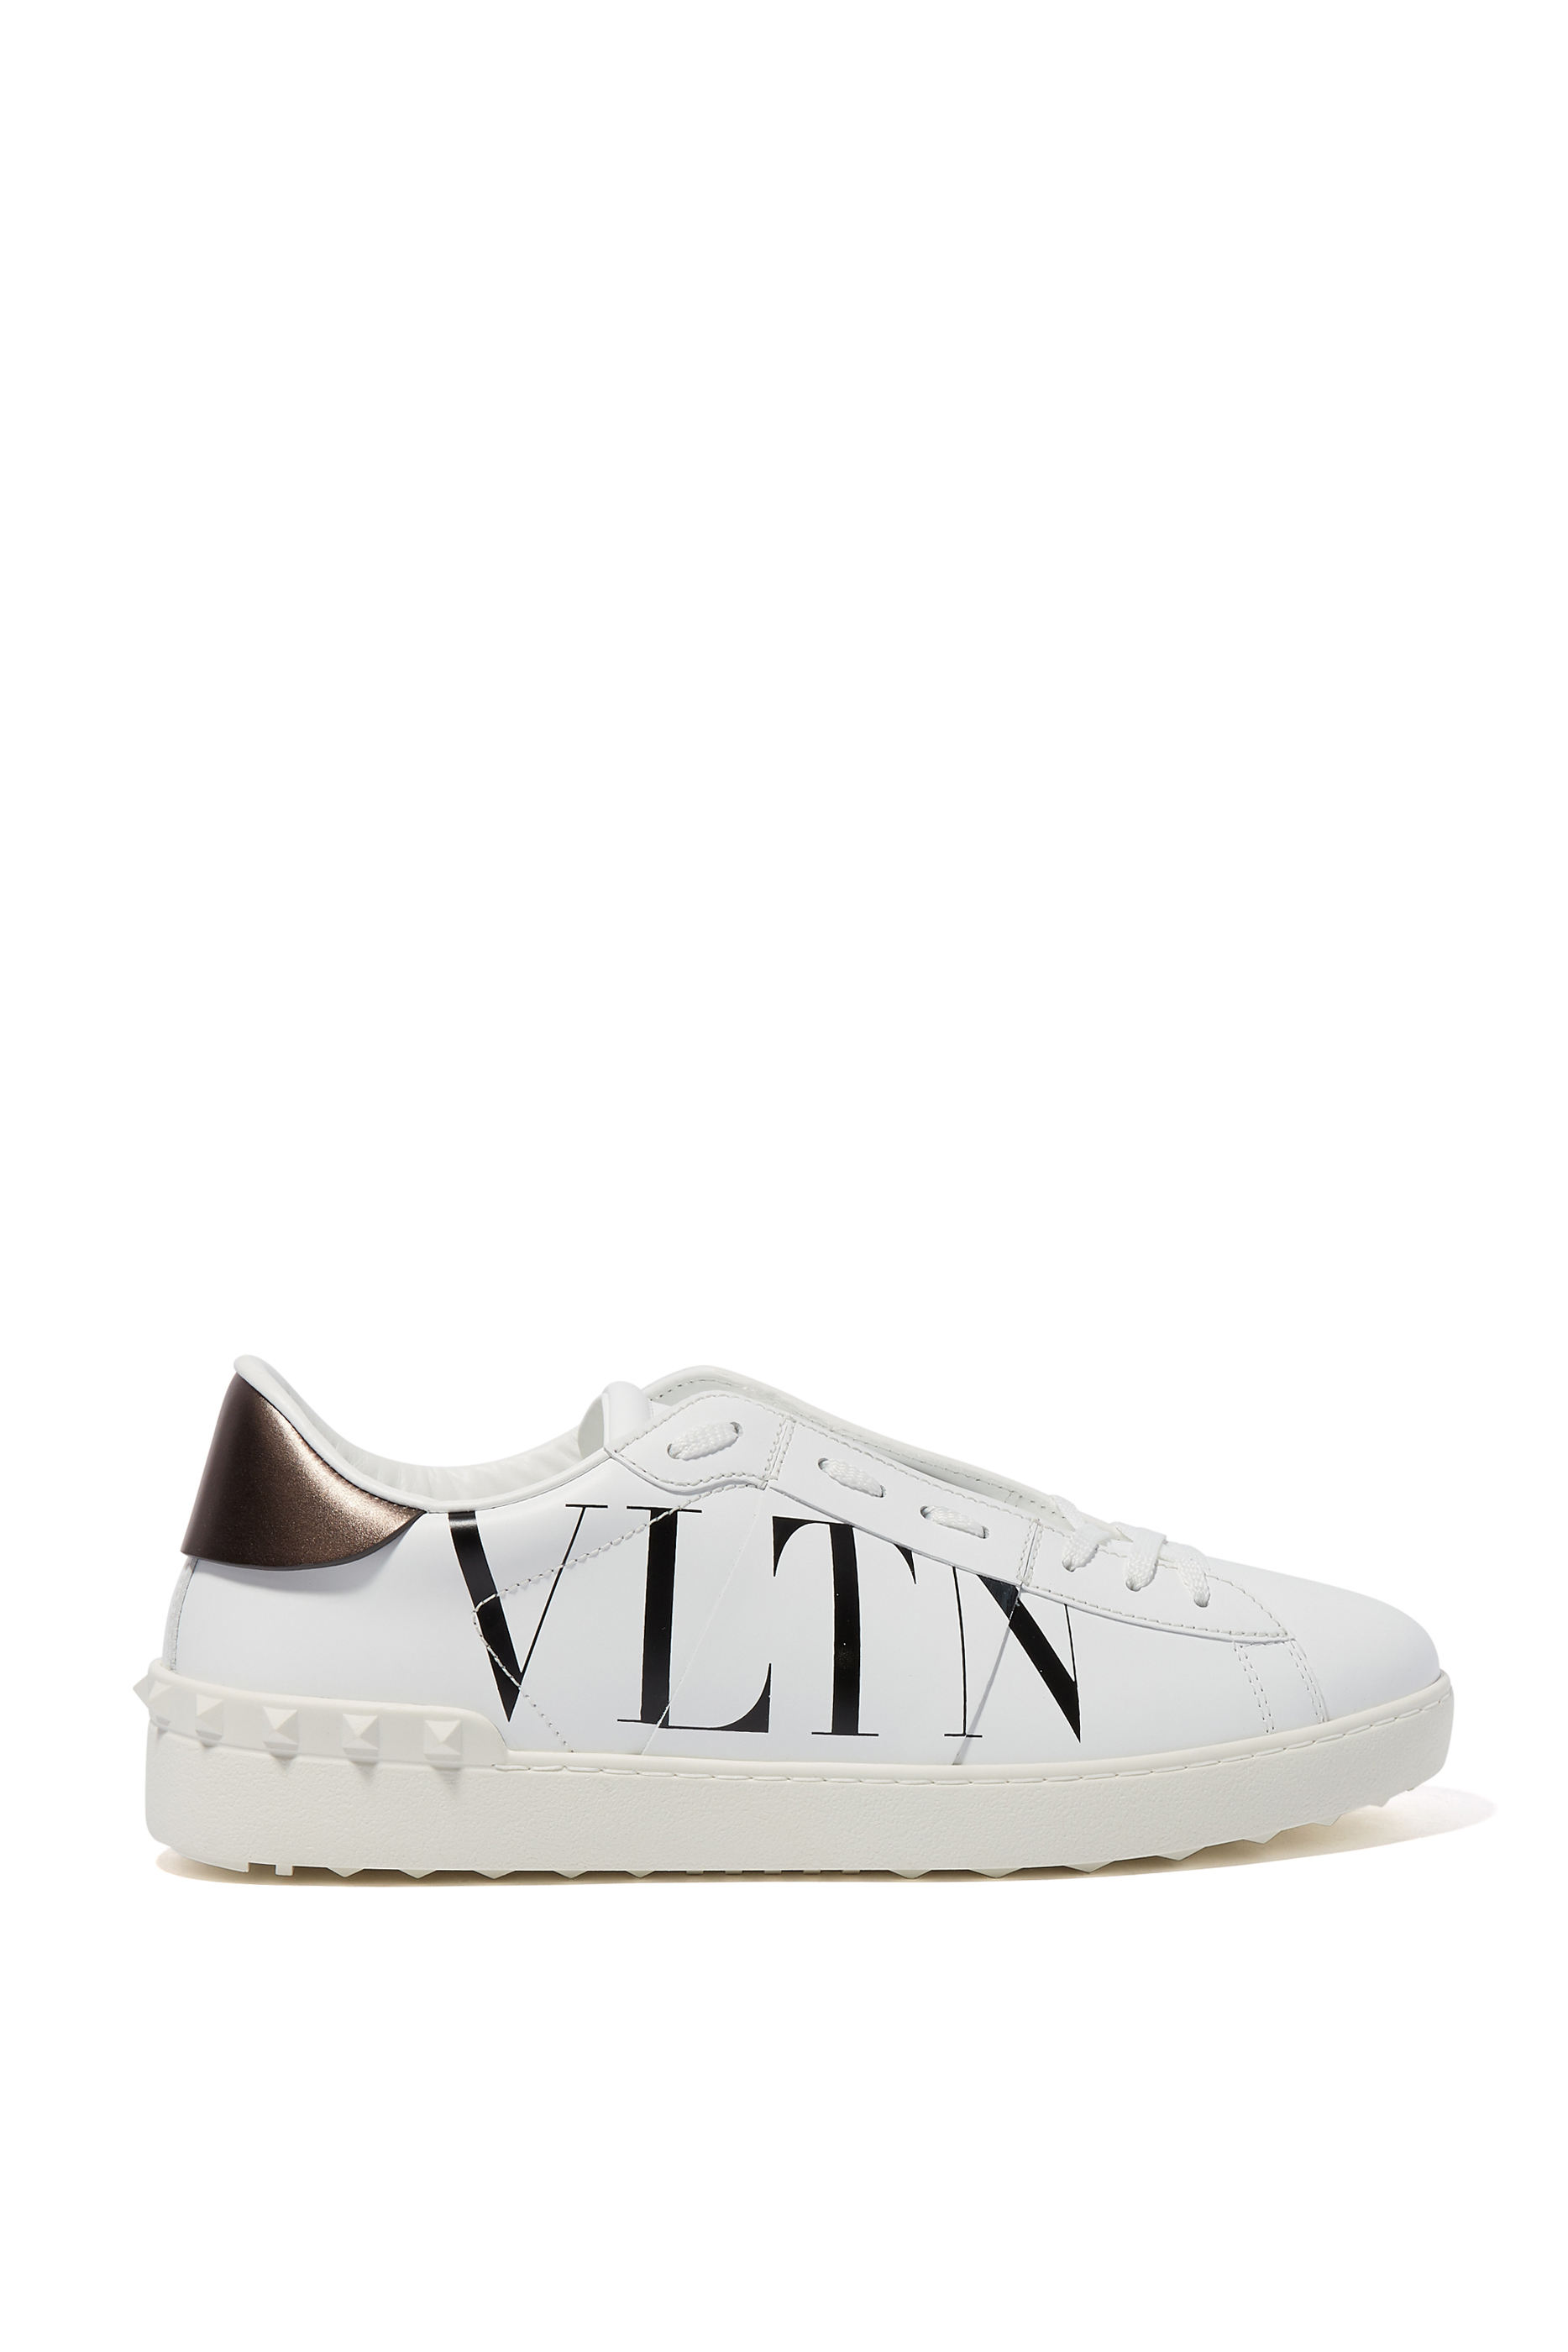 Buy Valentino Garavani Valentino Garavani VLTN Leather Sneakers for ...